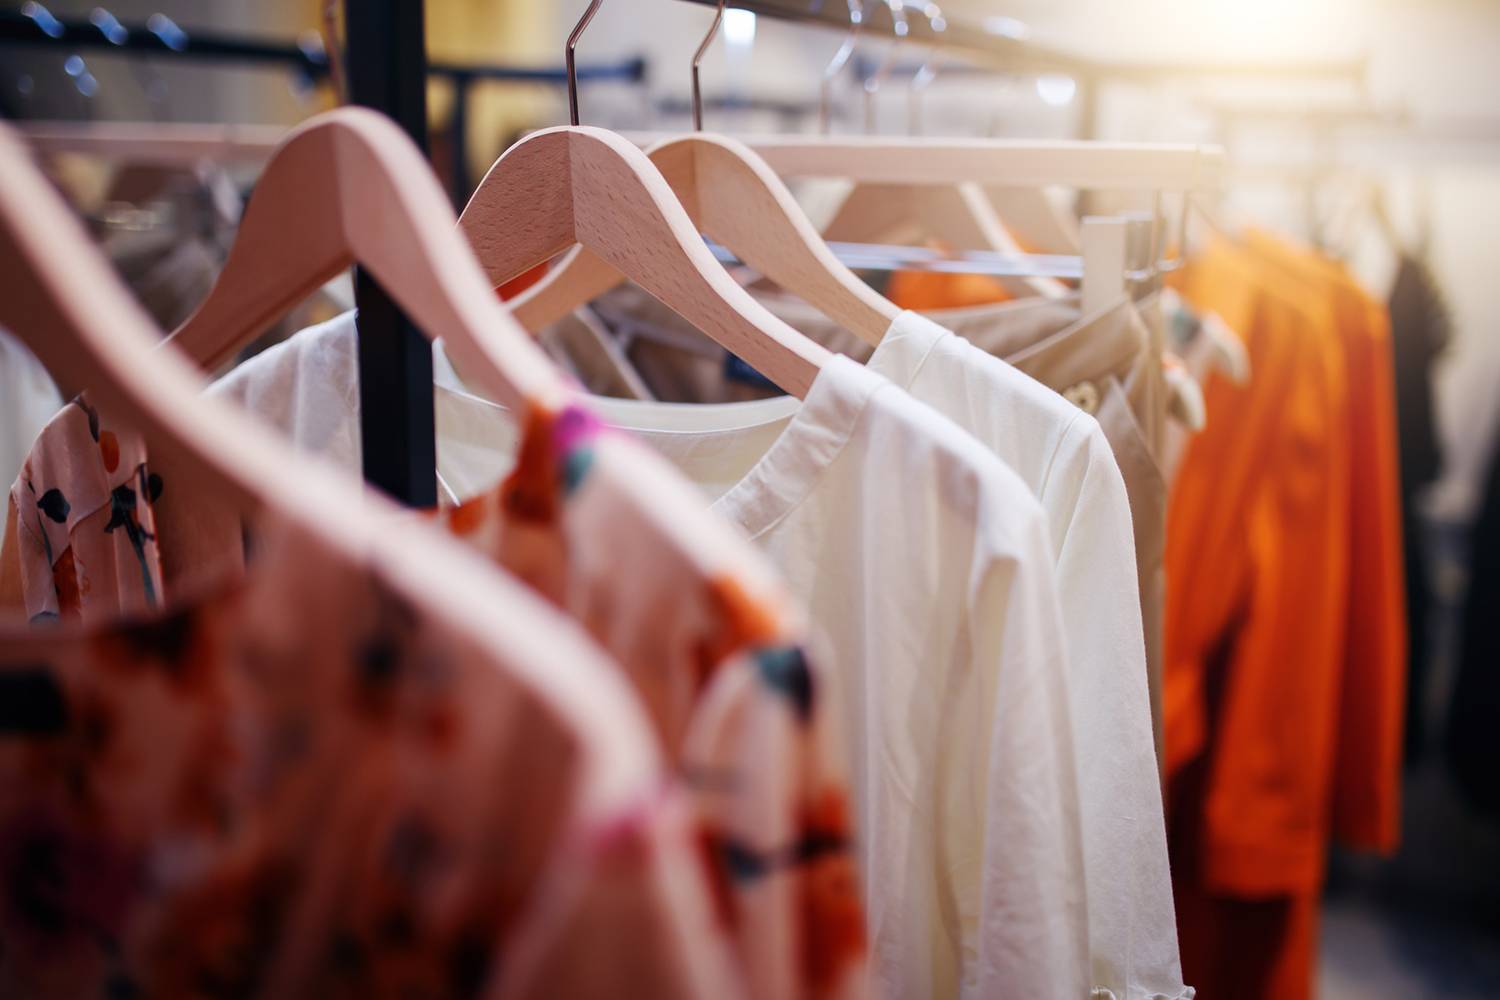 Retail clothing on hangers